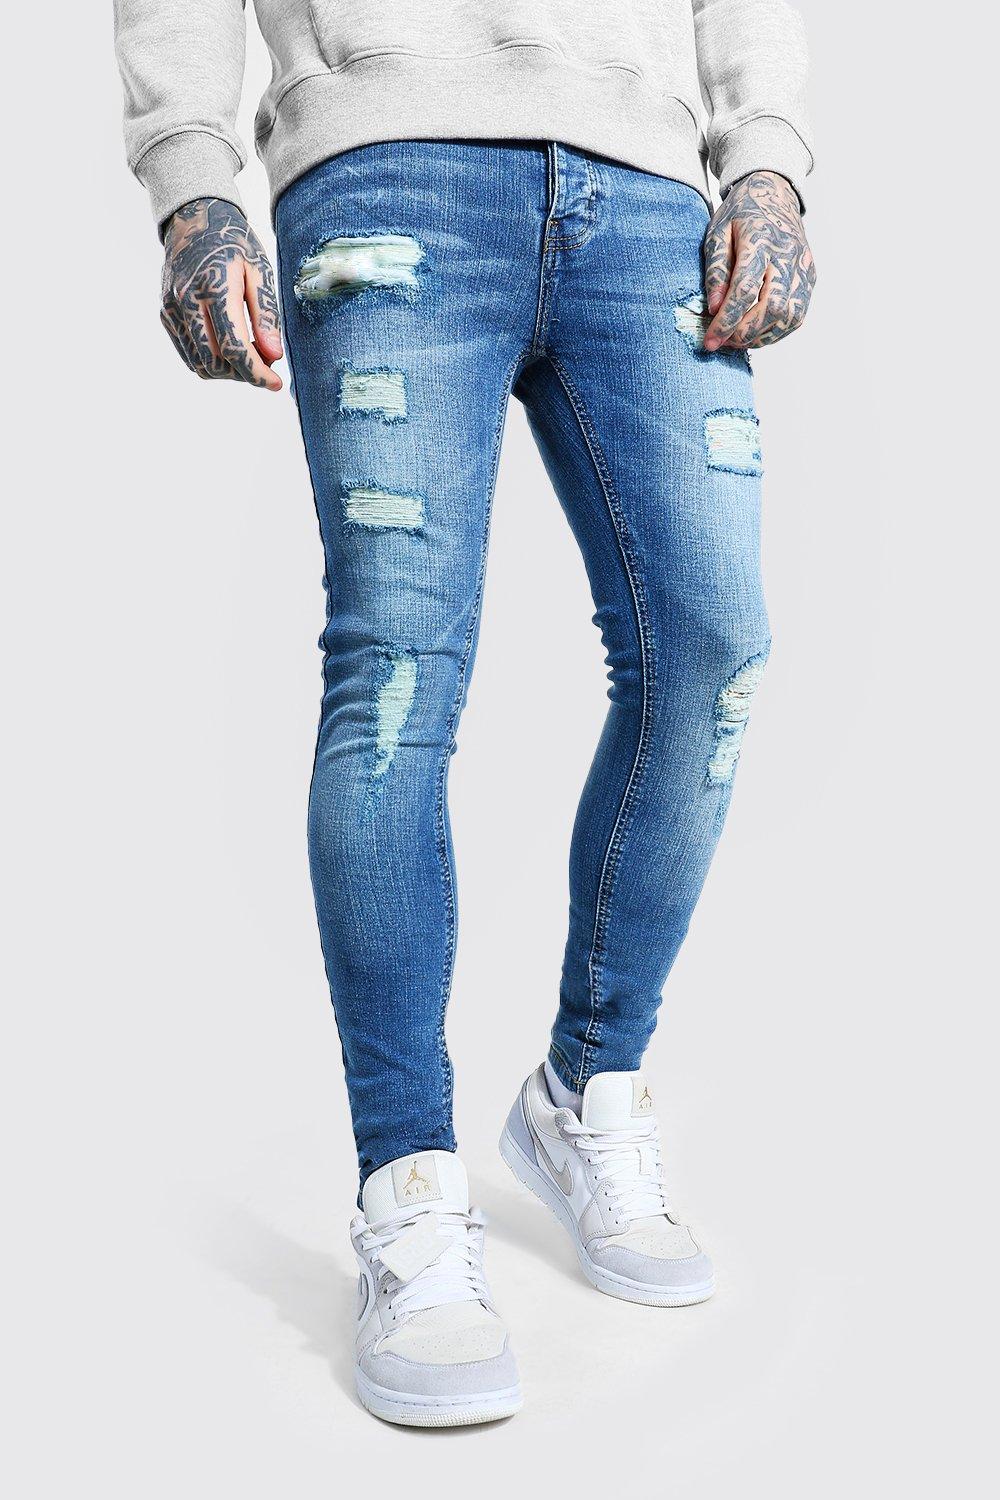 over ripped jeans